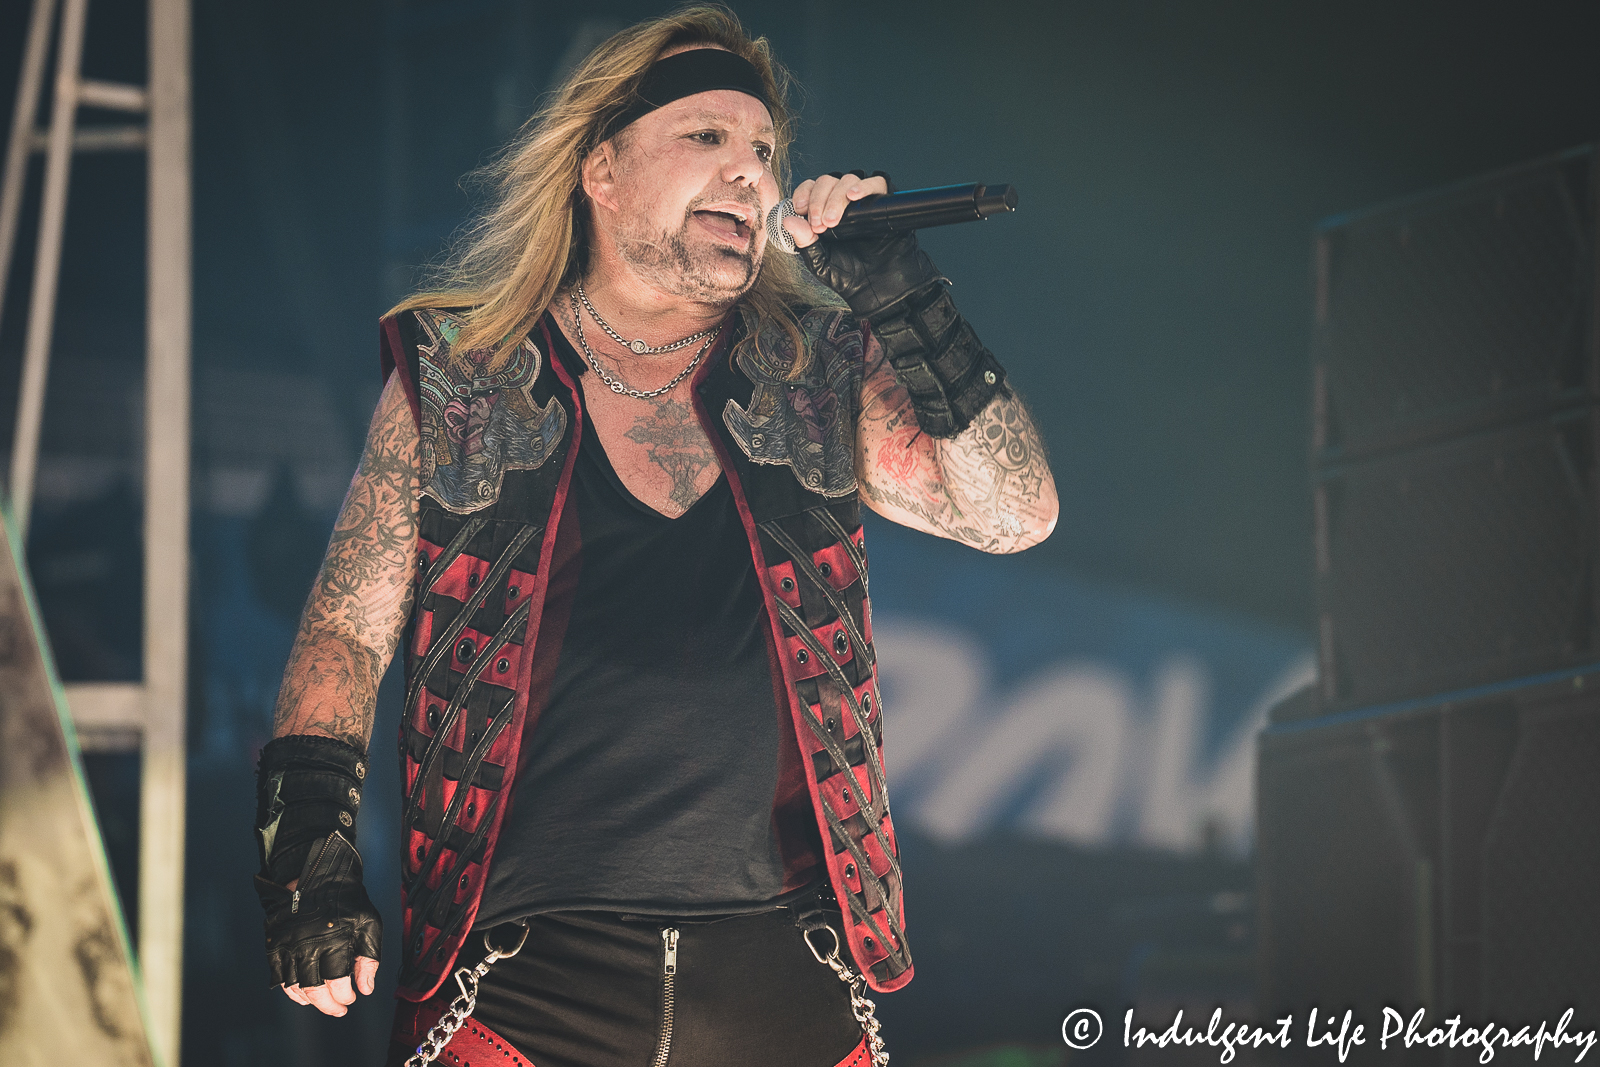 Mötley Crüe frontman Vince Neil performing "Wild Side" during the band's concert at Kauffman Stadium in Kansas City, MO on July 19, 2022.